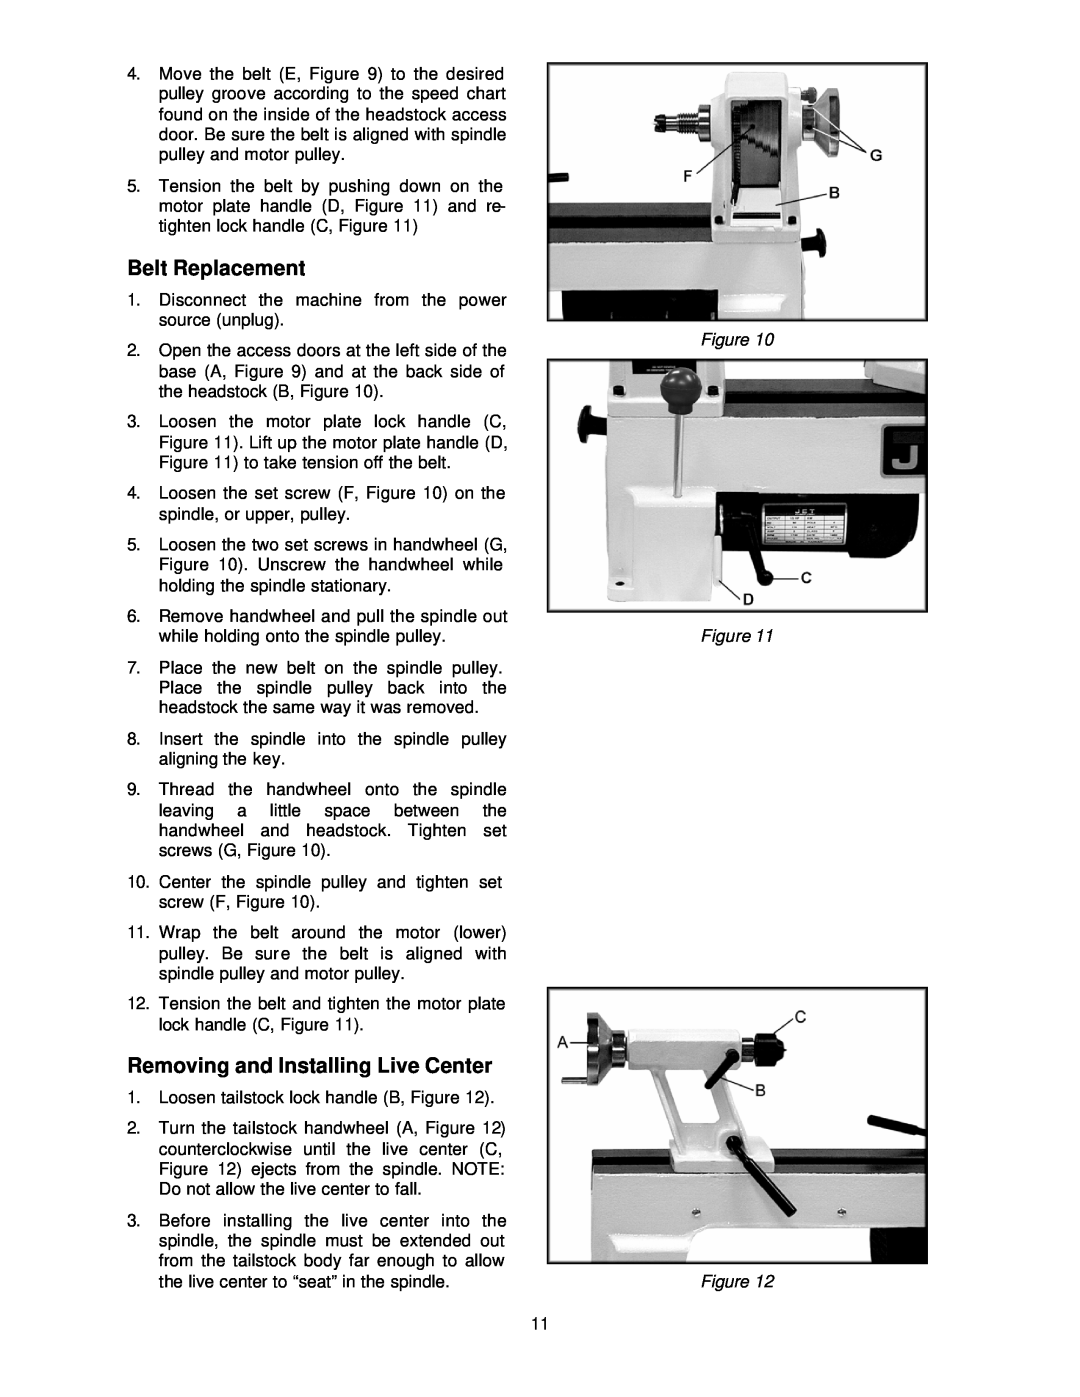 Jet Tools JWL-1220, JML-1014I operating instructions Belt Replacement, Removing and Installing Live Center 